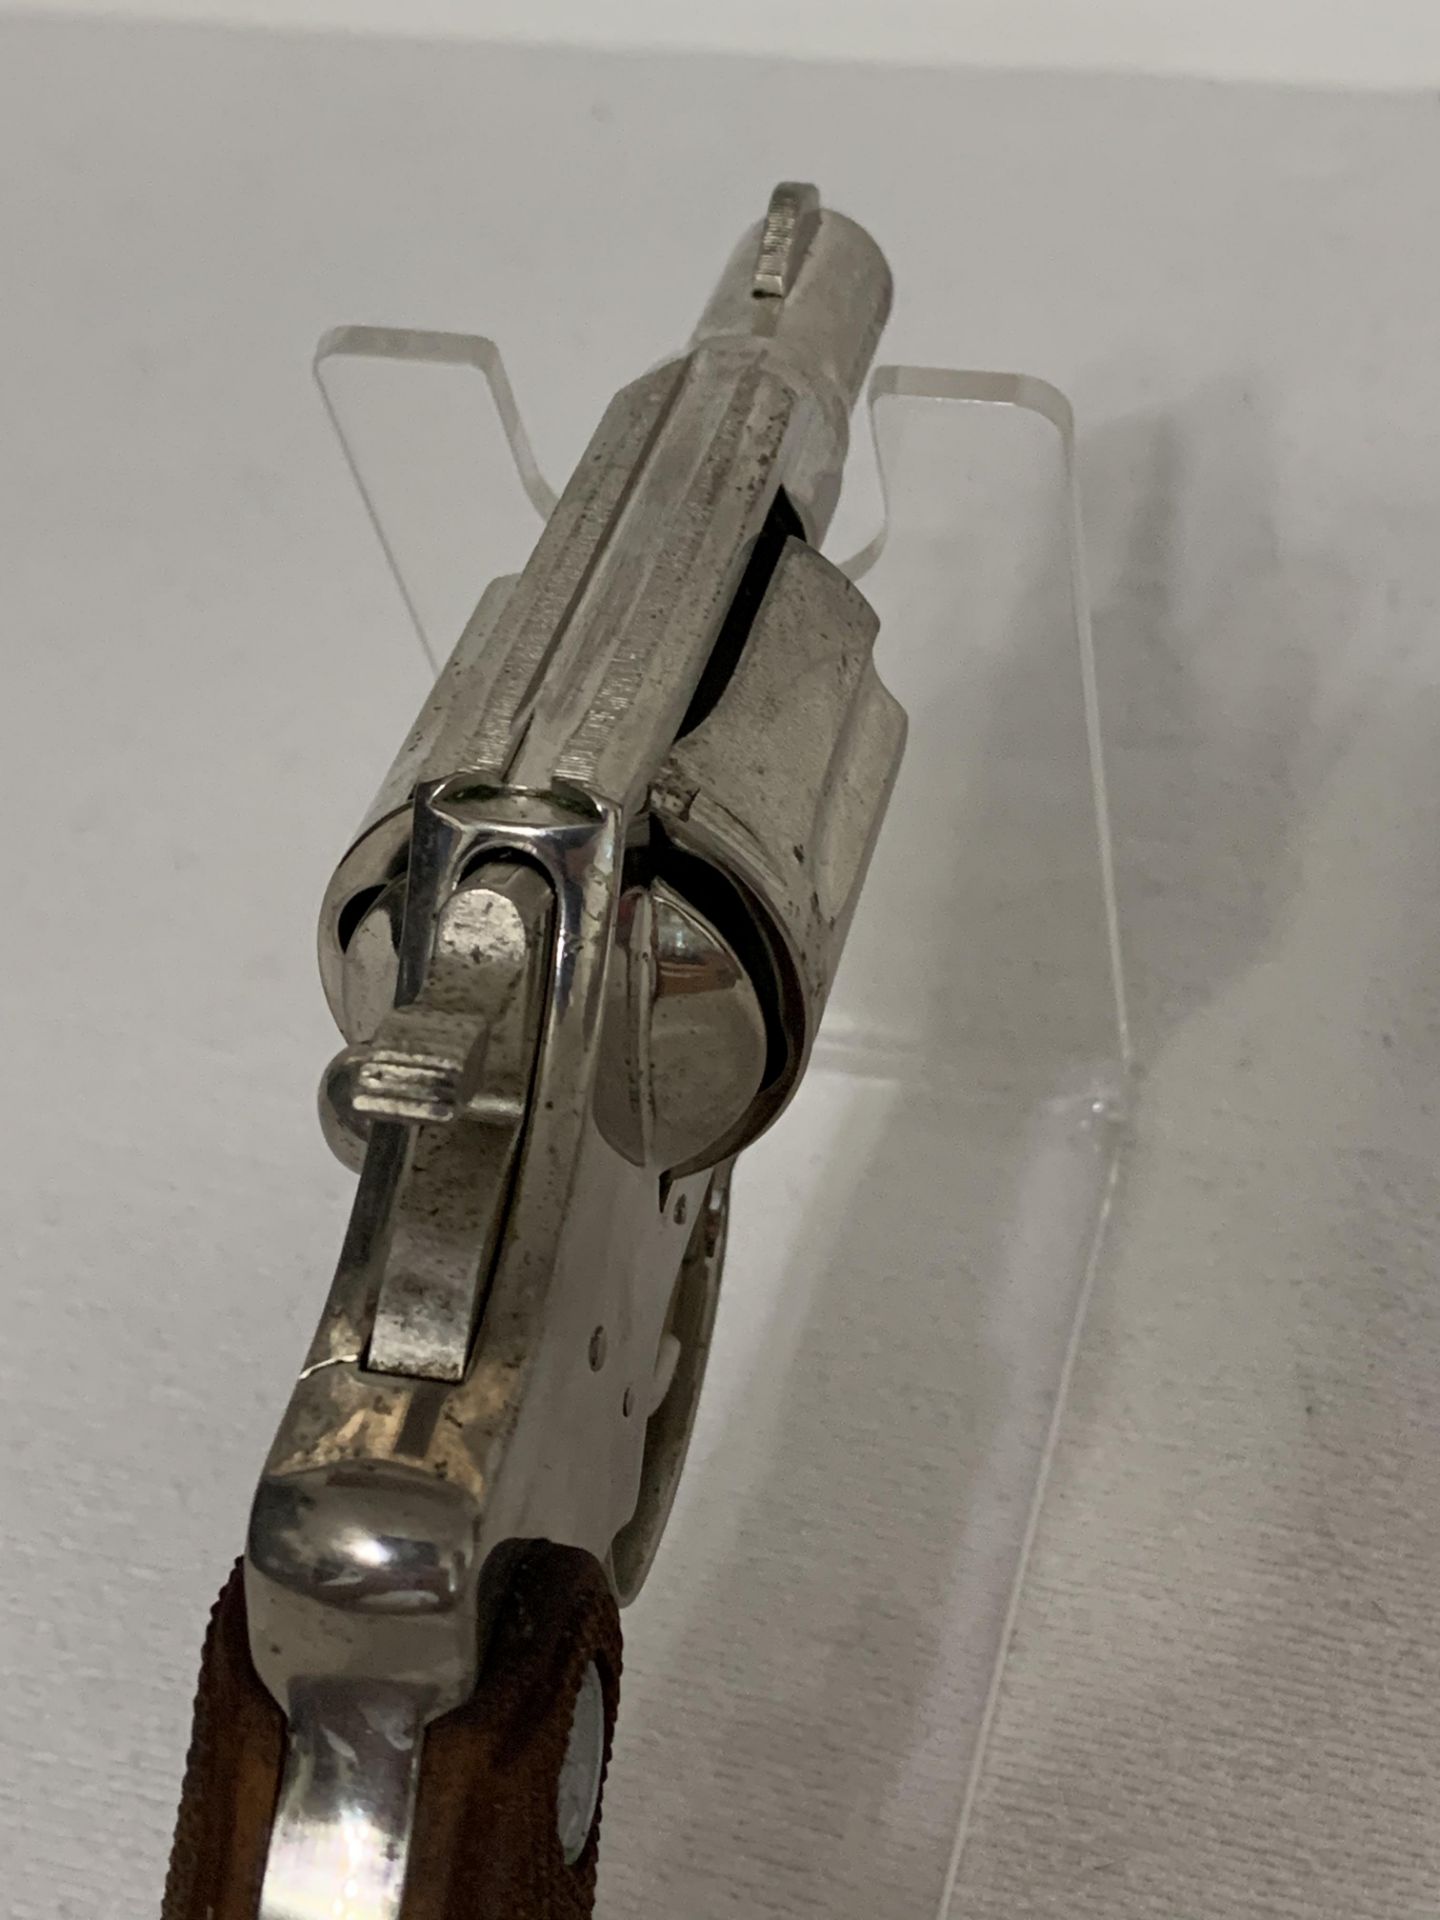 COLT DETECTIVE SPECIAL PISTOL - 38 CAL - NICKEL - WITH ORIGINAL 1971 GRIPS (FOB HOLLYWOOD, FL) - Image 6 of 11